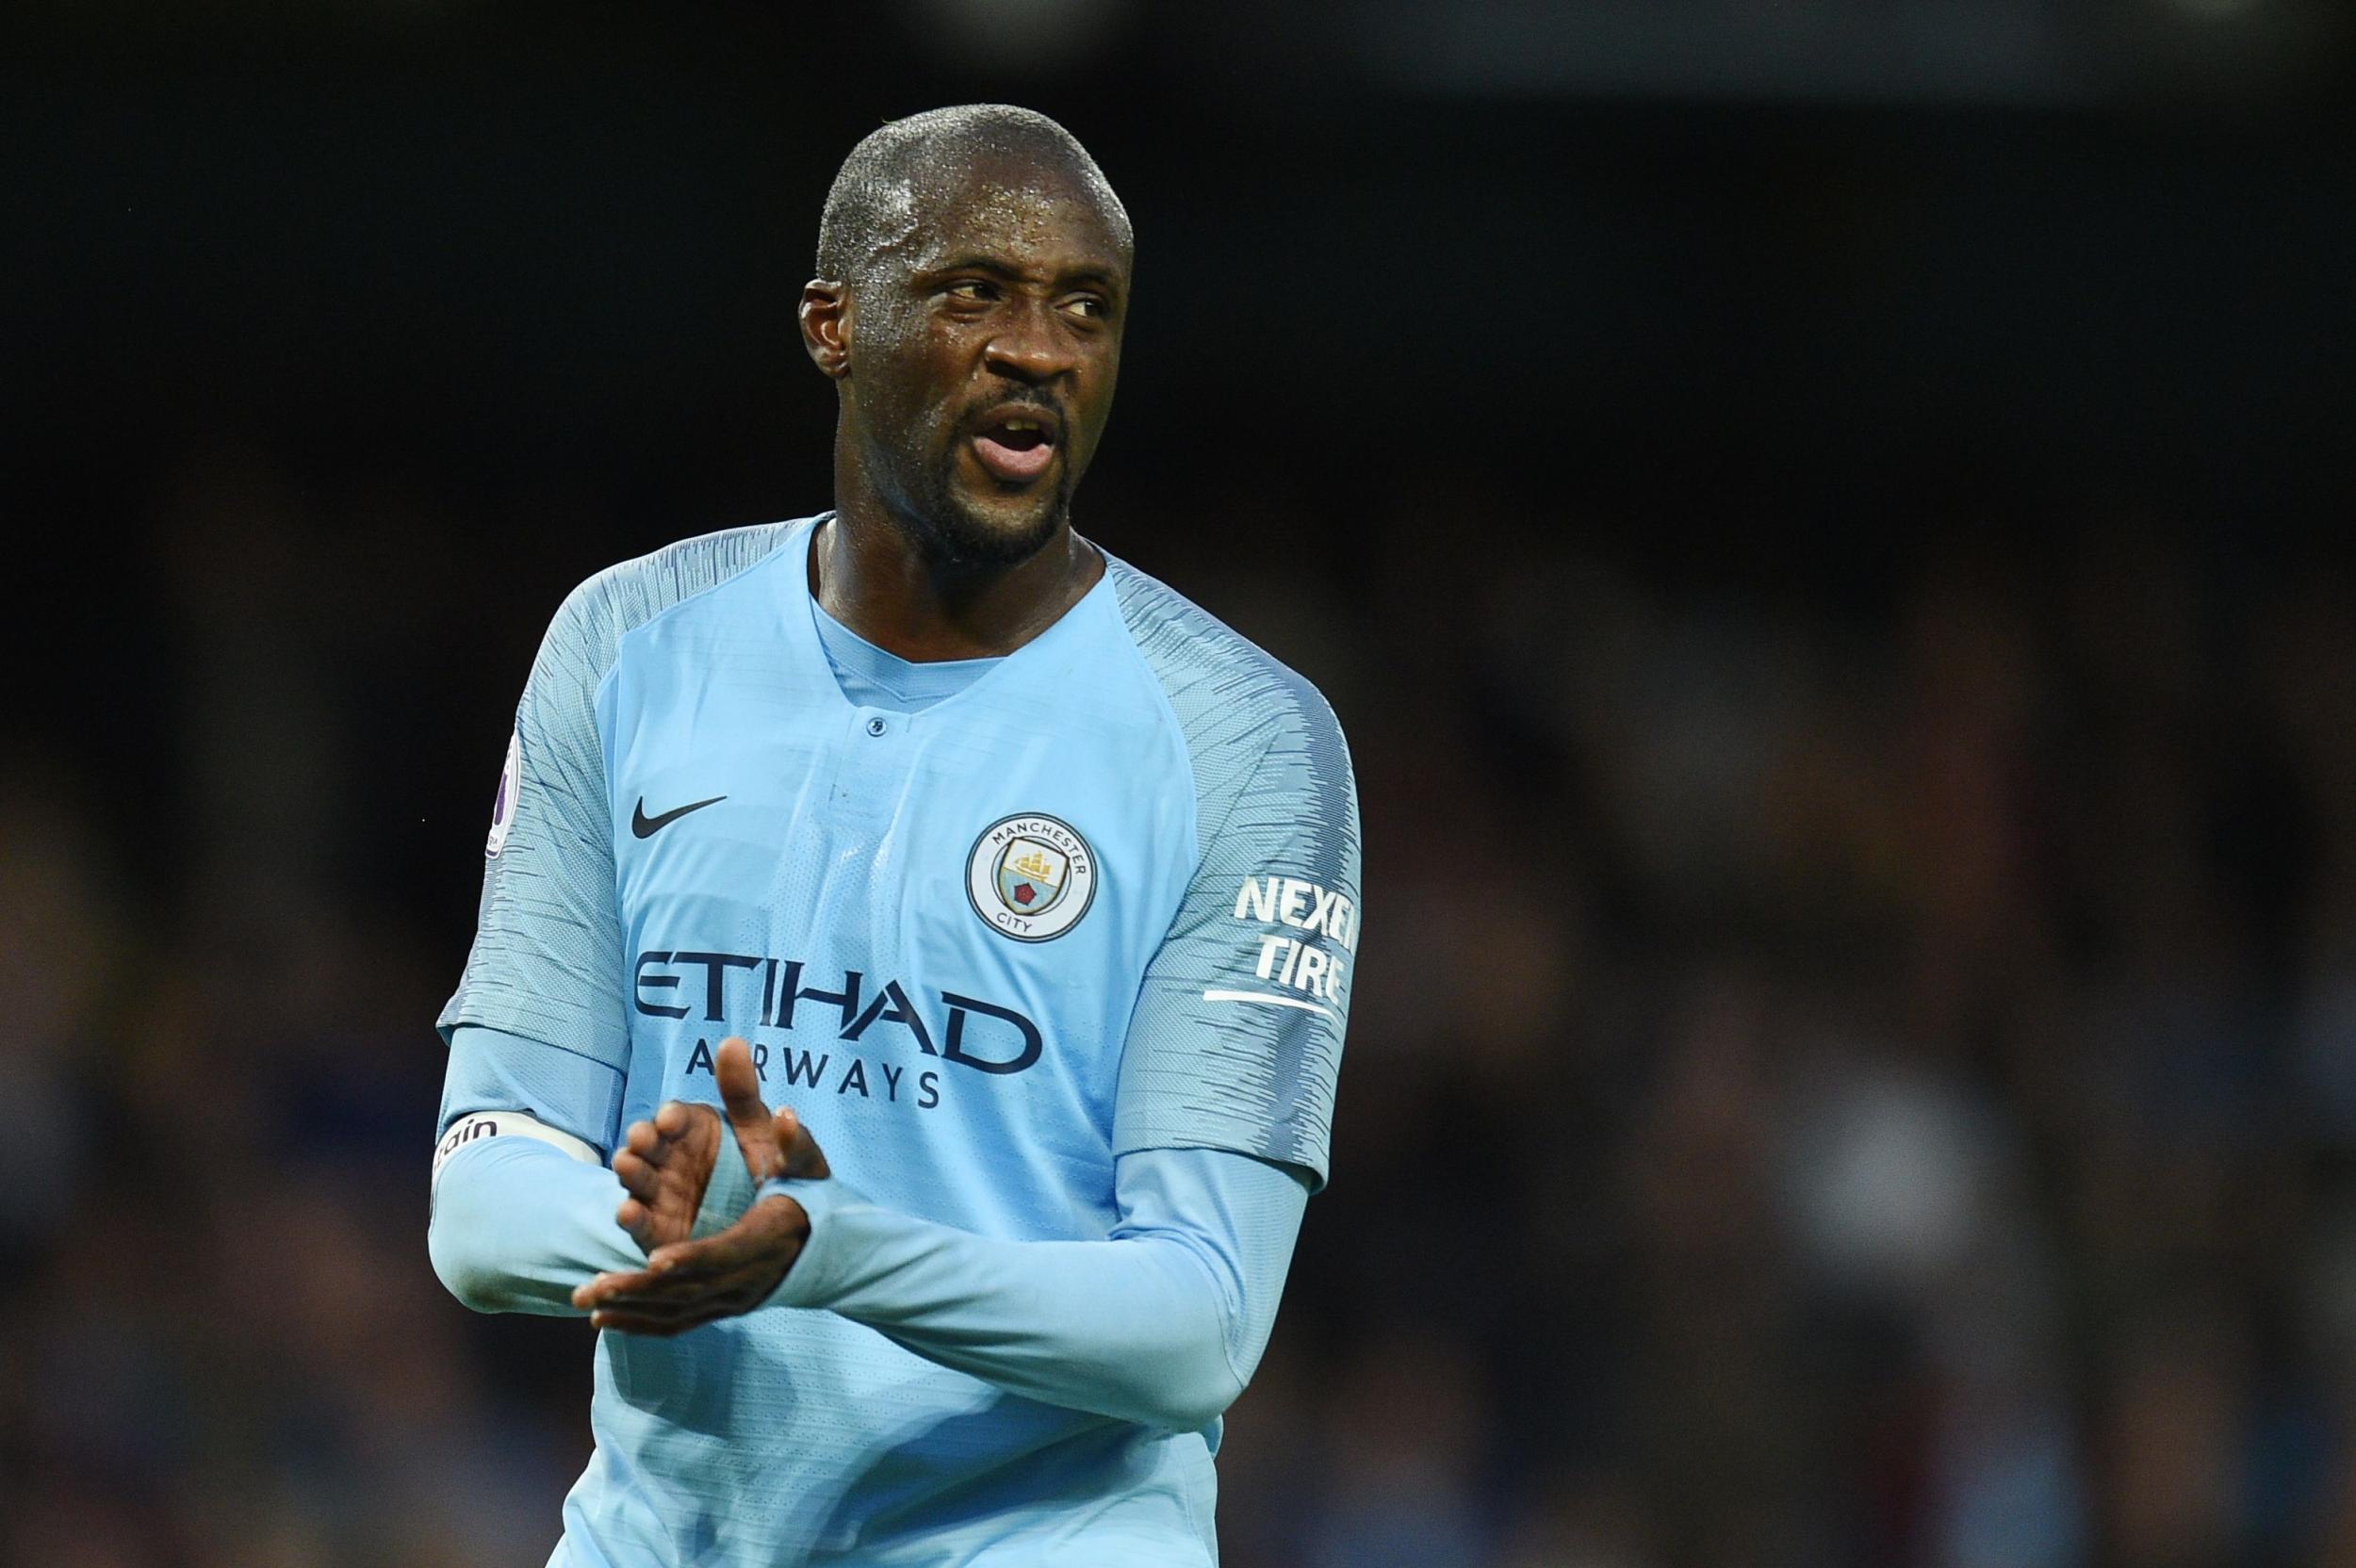 It's time for a change - Yaya Toure to Pep